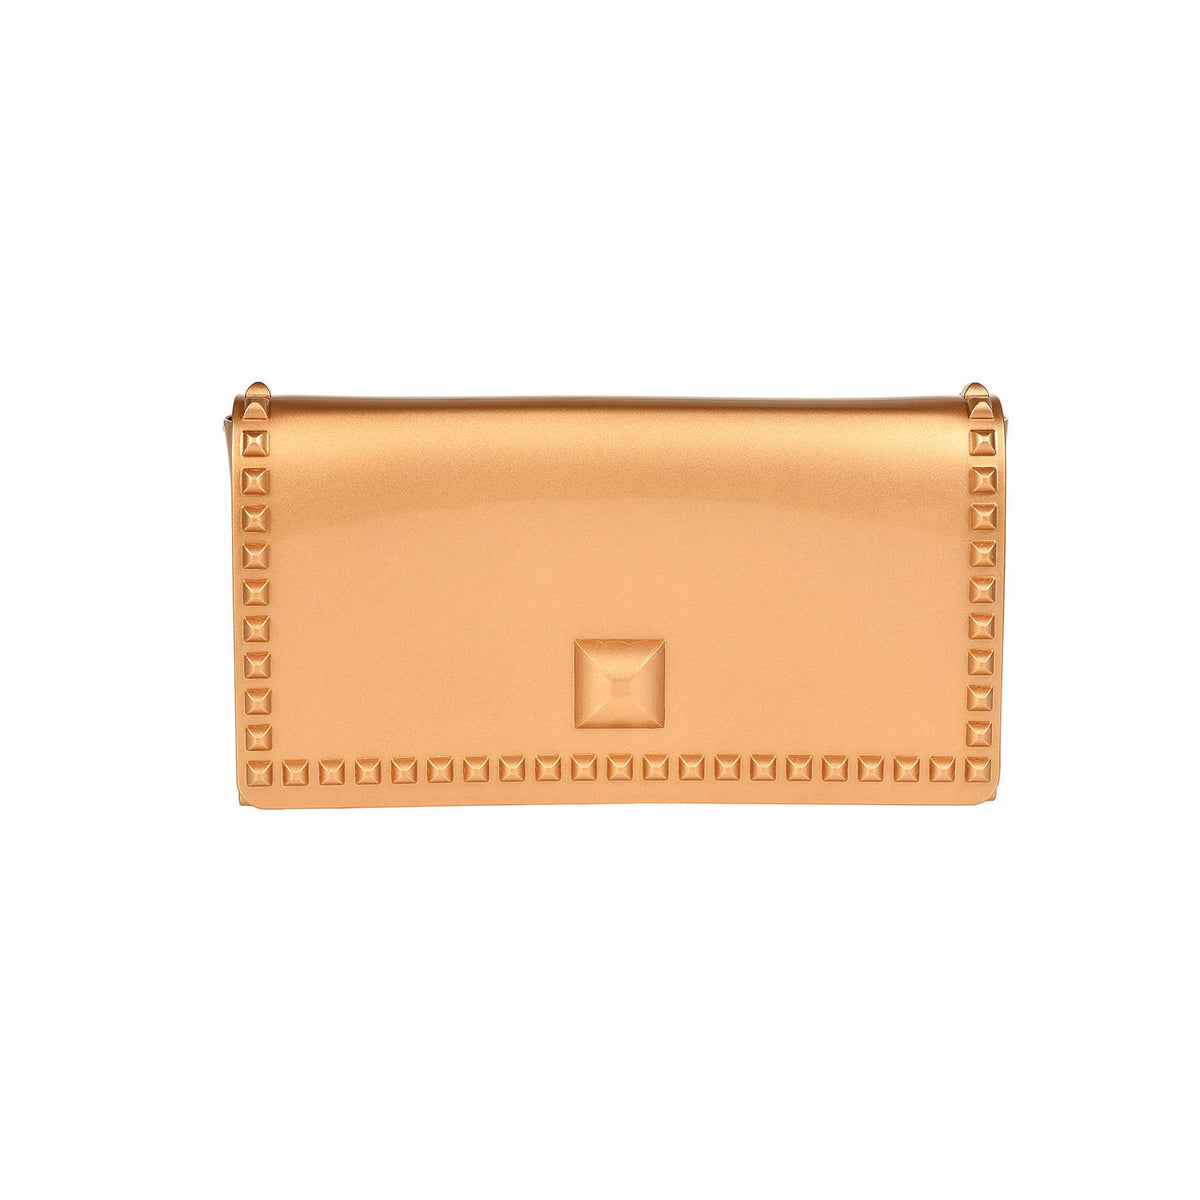 Studded Nora big purses in color gold